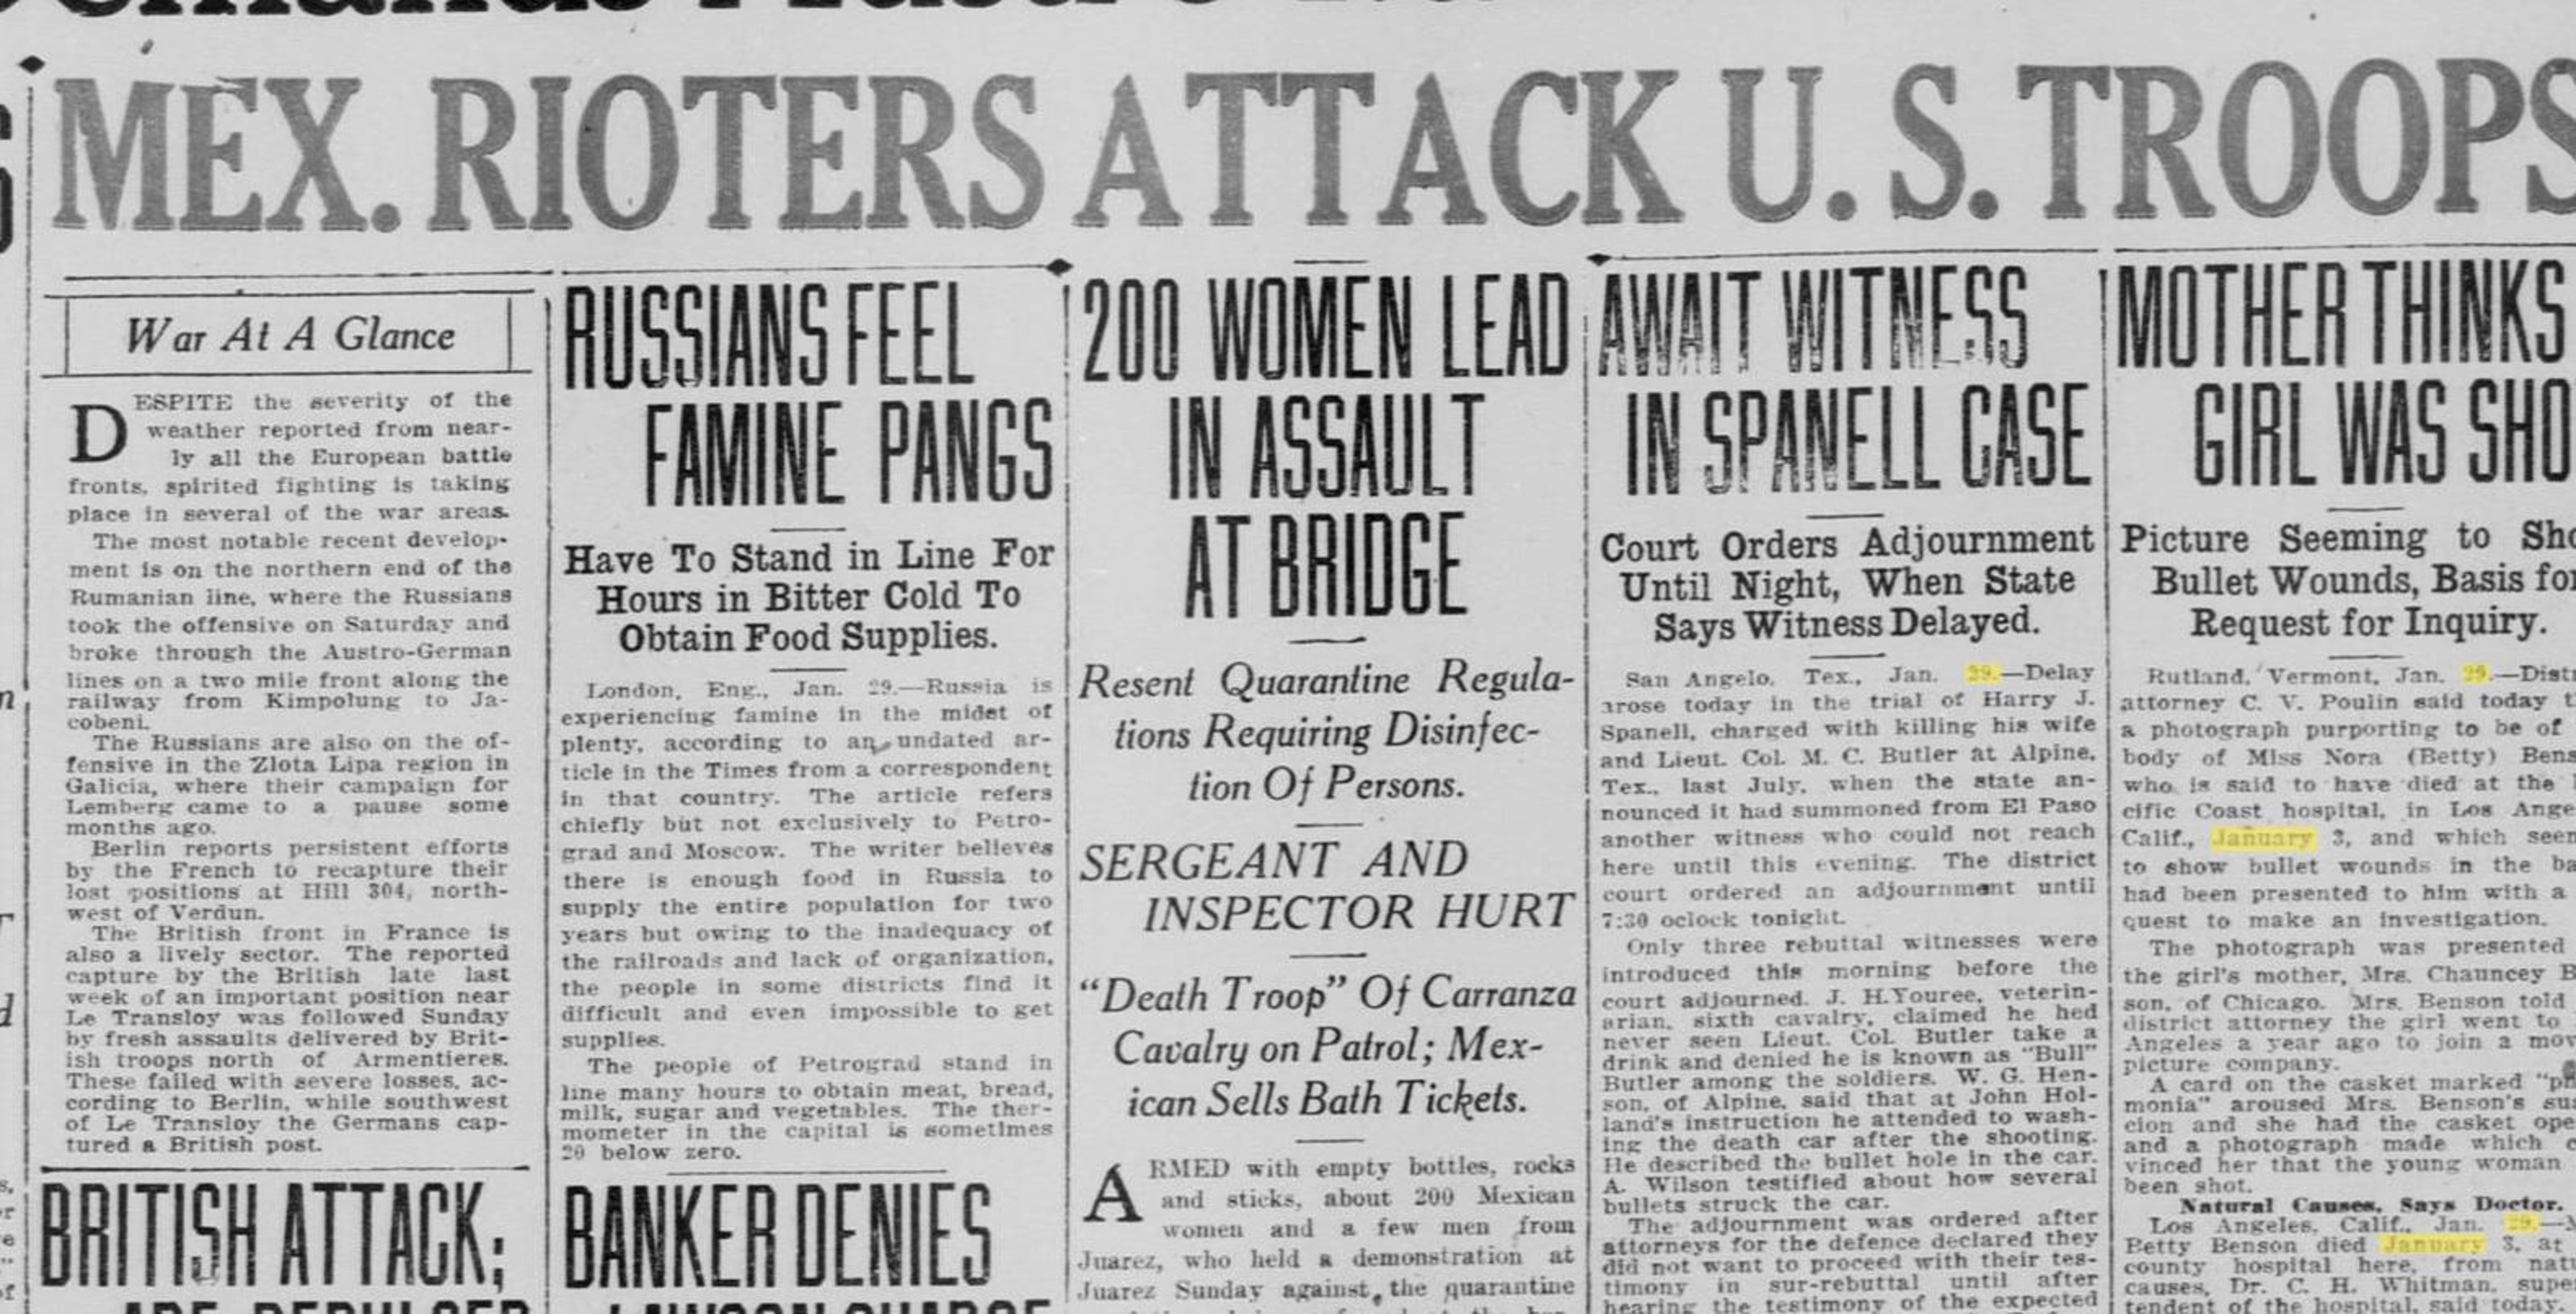 Newspaper article: Mex. Rioters attack U.S. Troops. 200 Women Lead in Assault at Bridge. Resent Quarantine Regulations Requiring Disinfection of Persons. Sergeant and Inspector Hurt. 